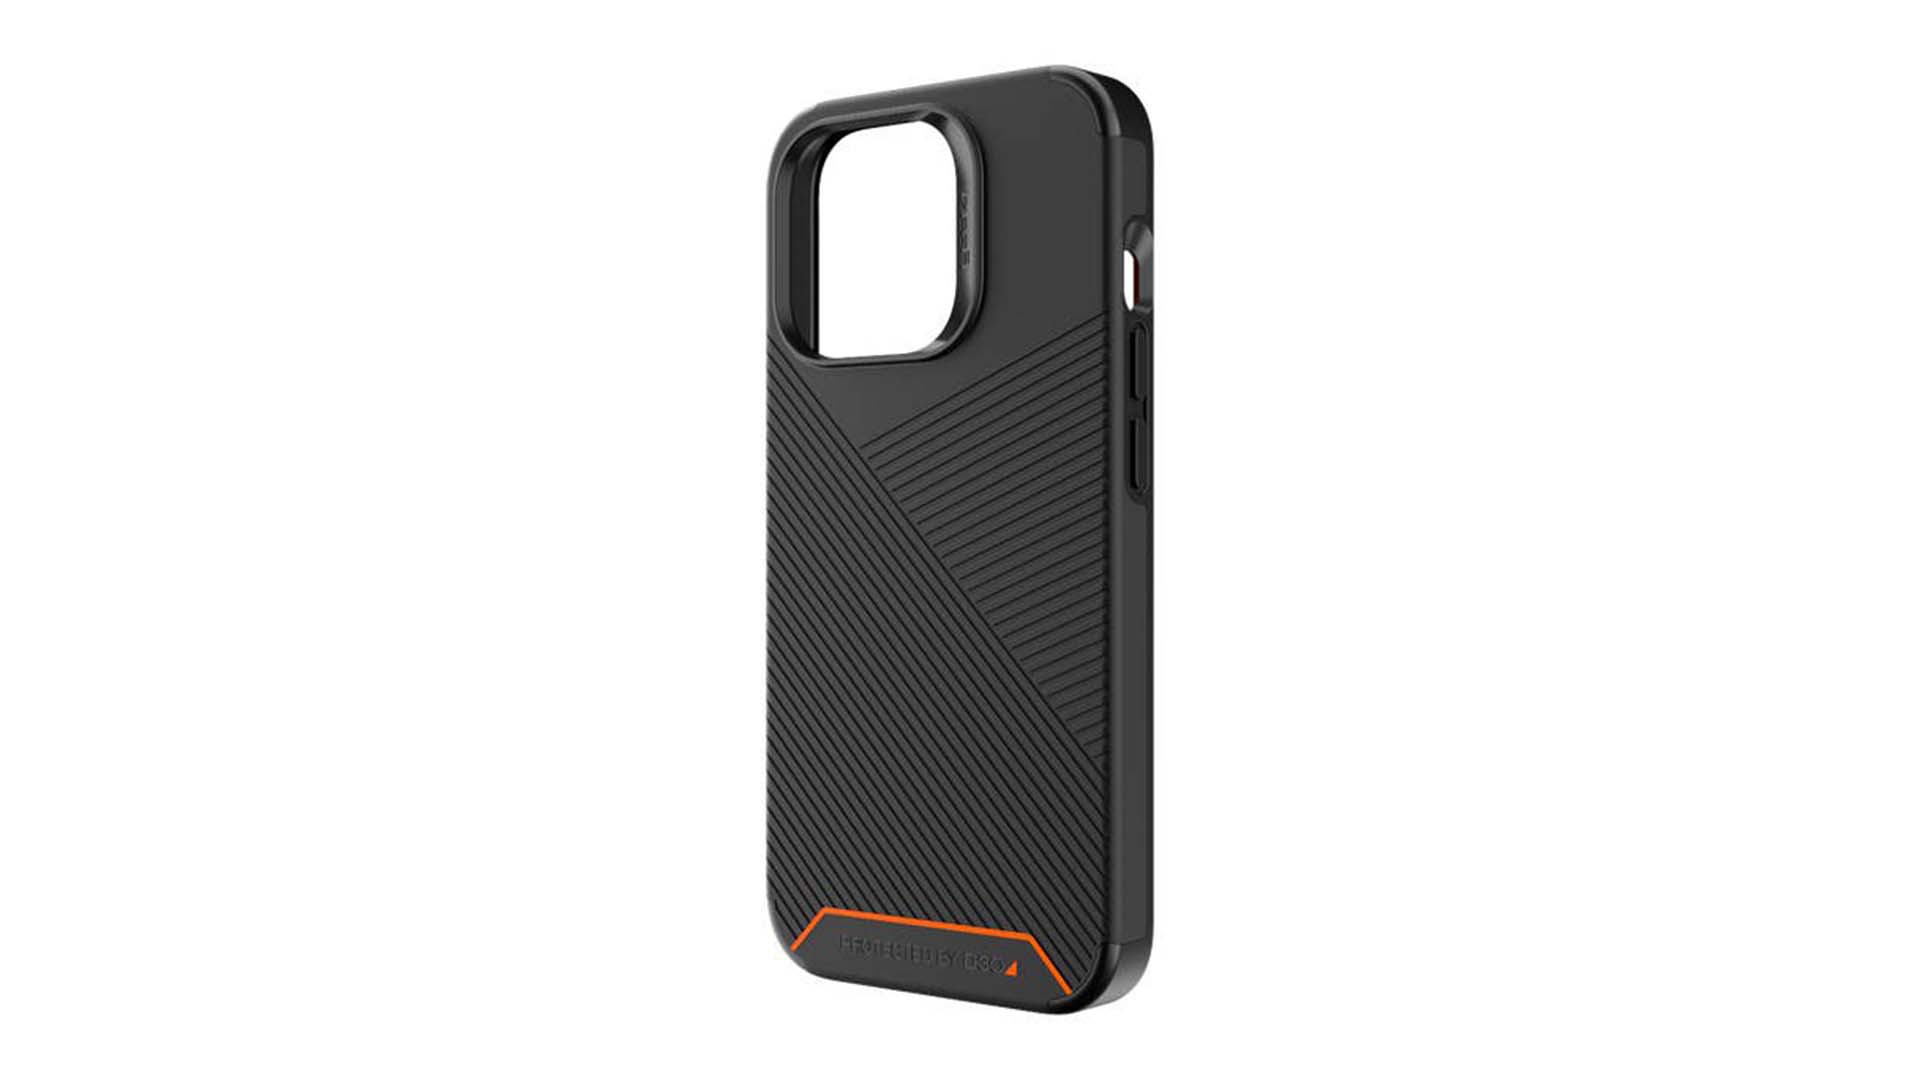 An example of one of the best iPhone 13 Pro cases